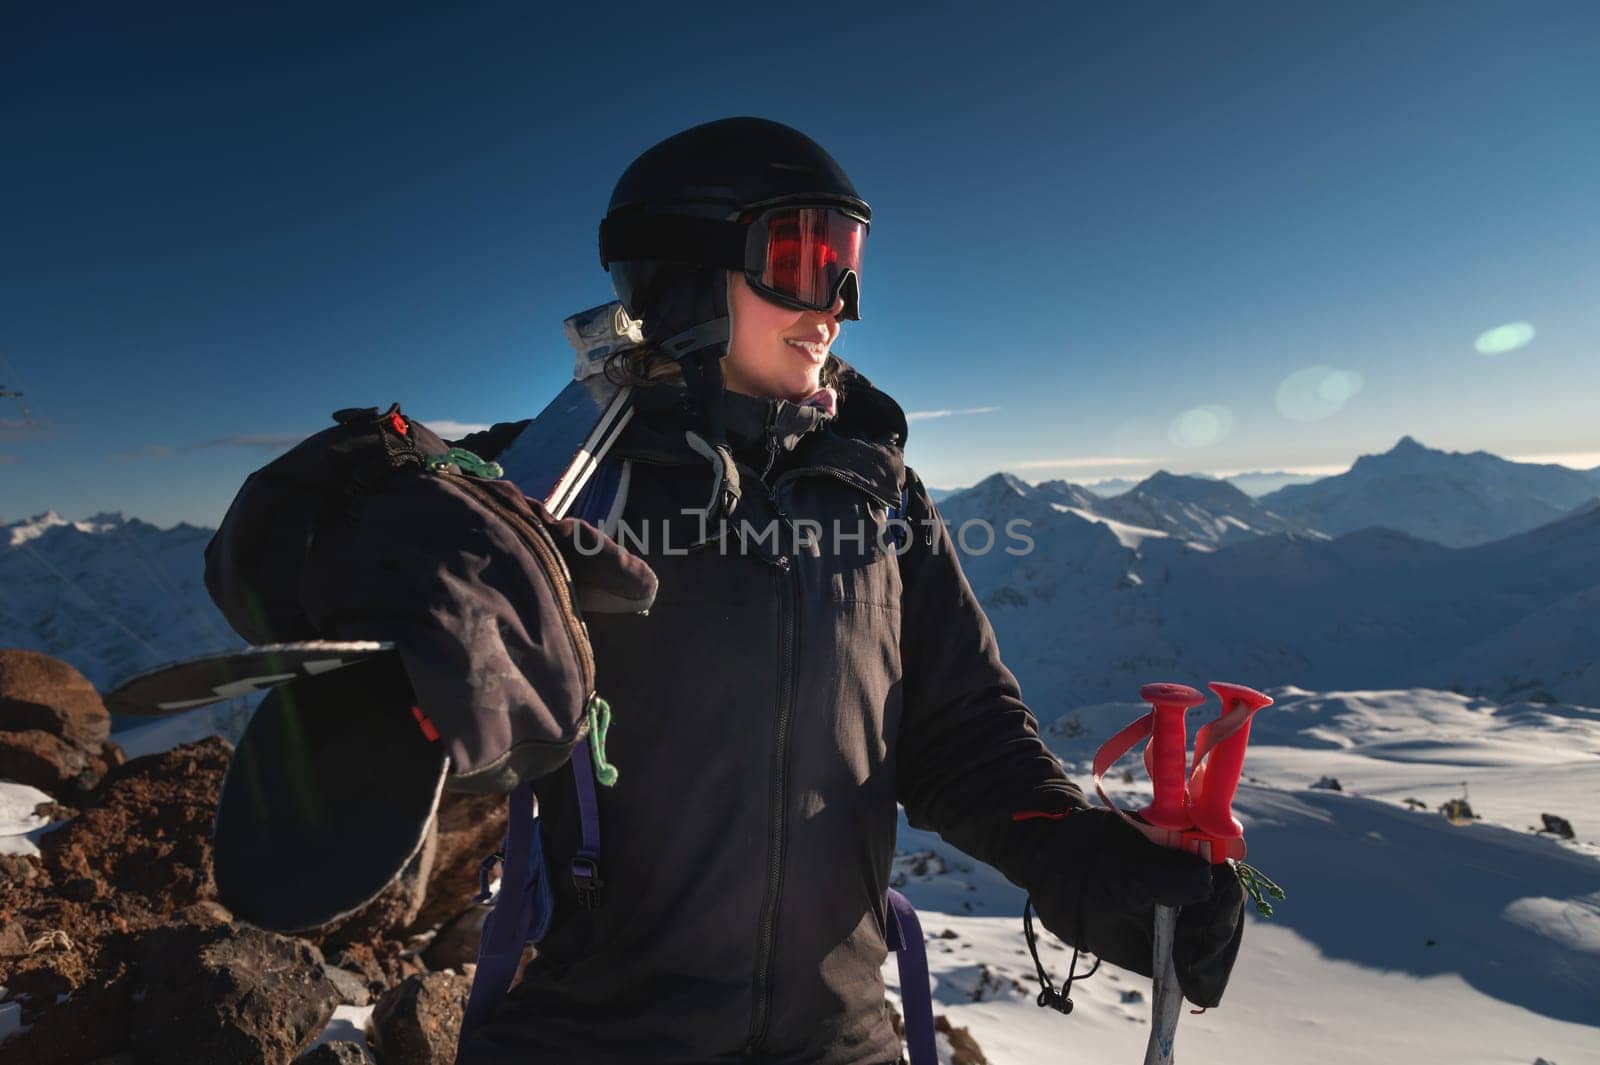 Image of a woman with skis on her shoulder against a snowy hill or mountain range. Portrait of a cheerful skier carrying skis on her shoulder by yanik88